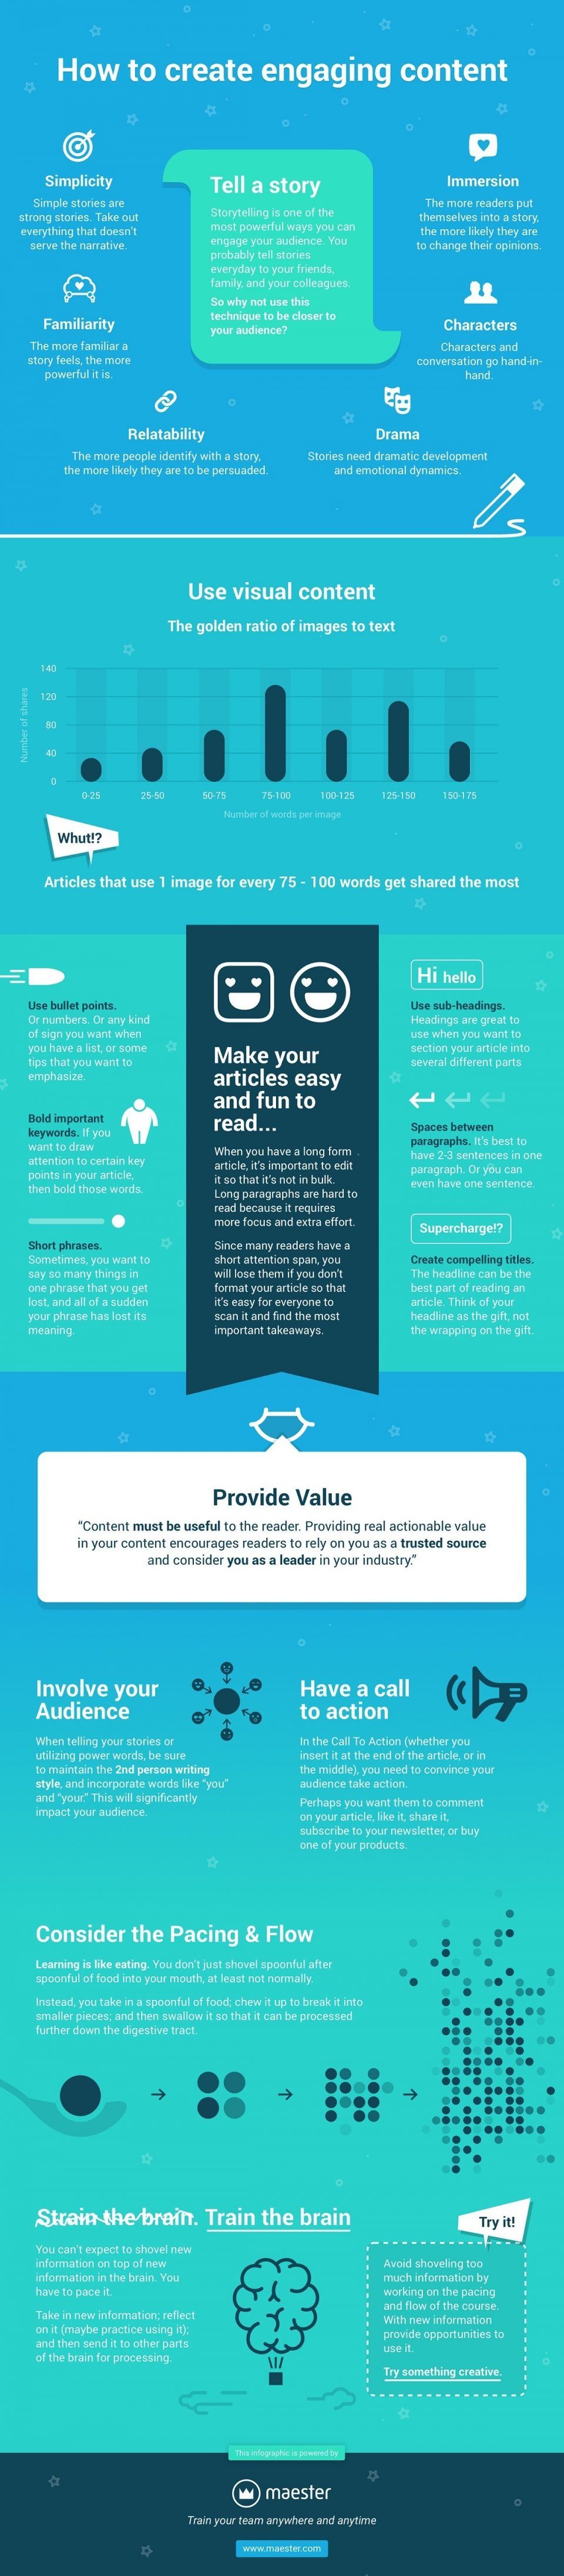 How to Create Engaging Content Infographic